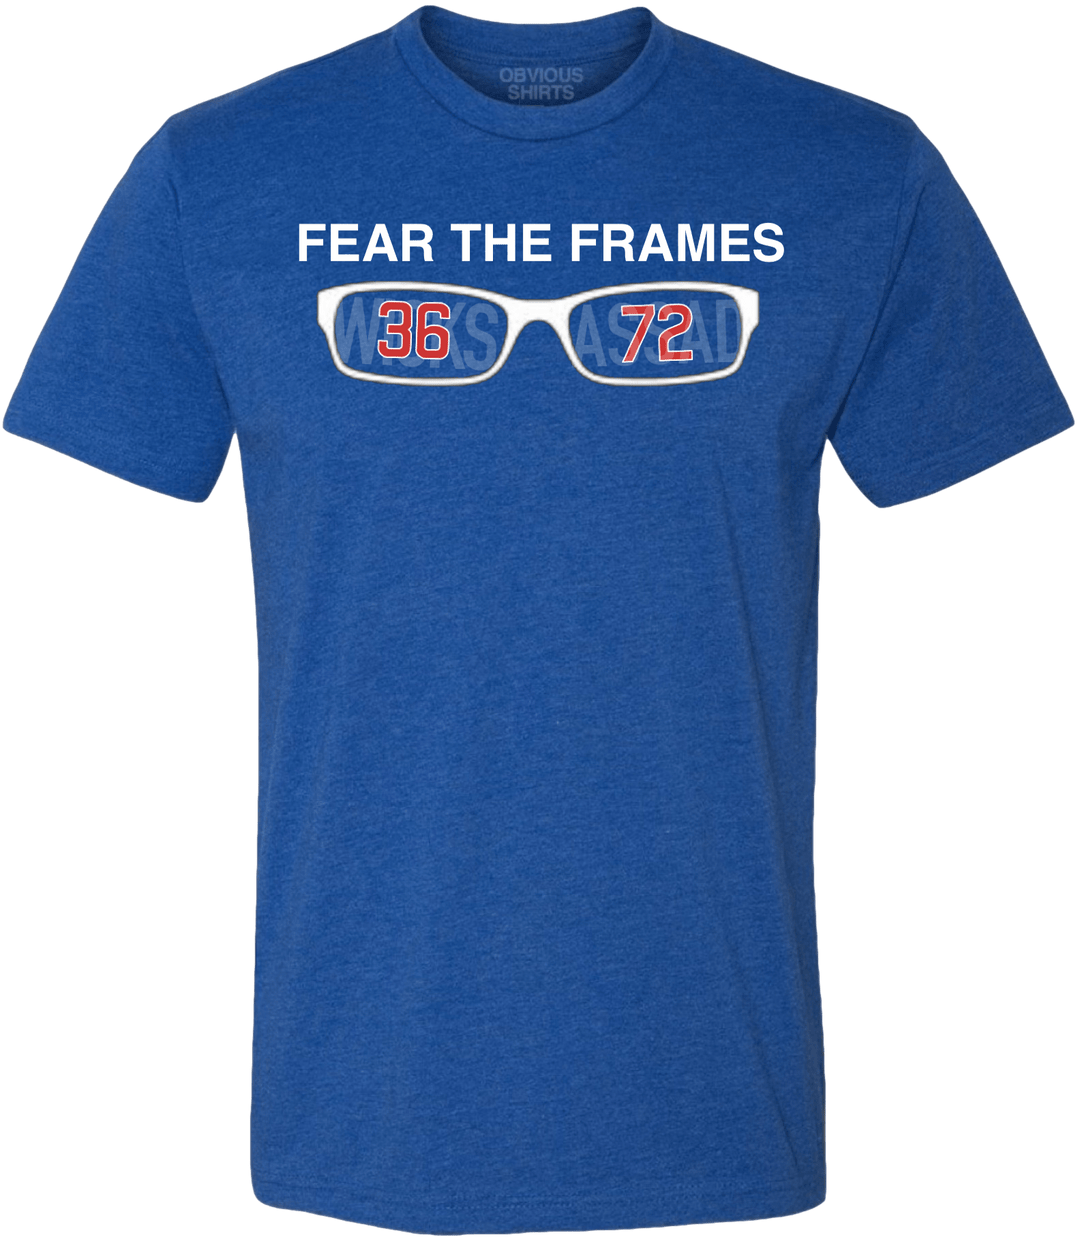 FEAR THE FRAMES. - OBVIOUS SHIRTS